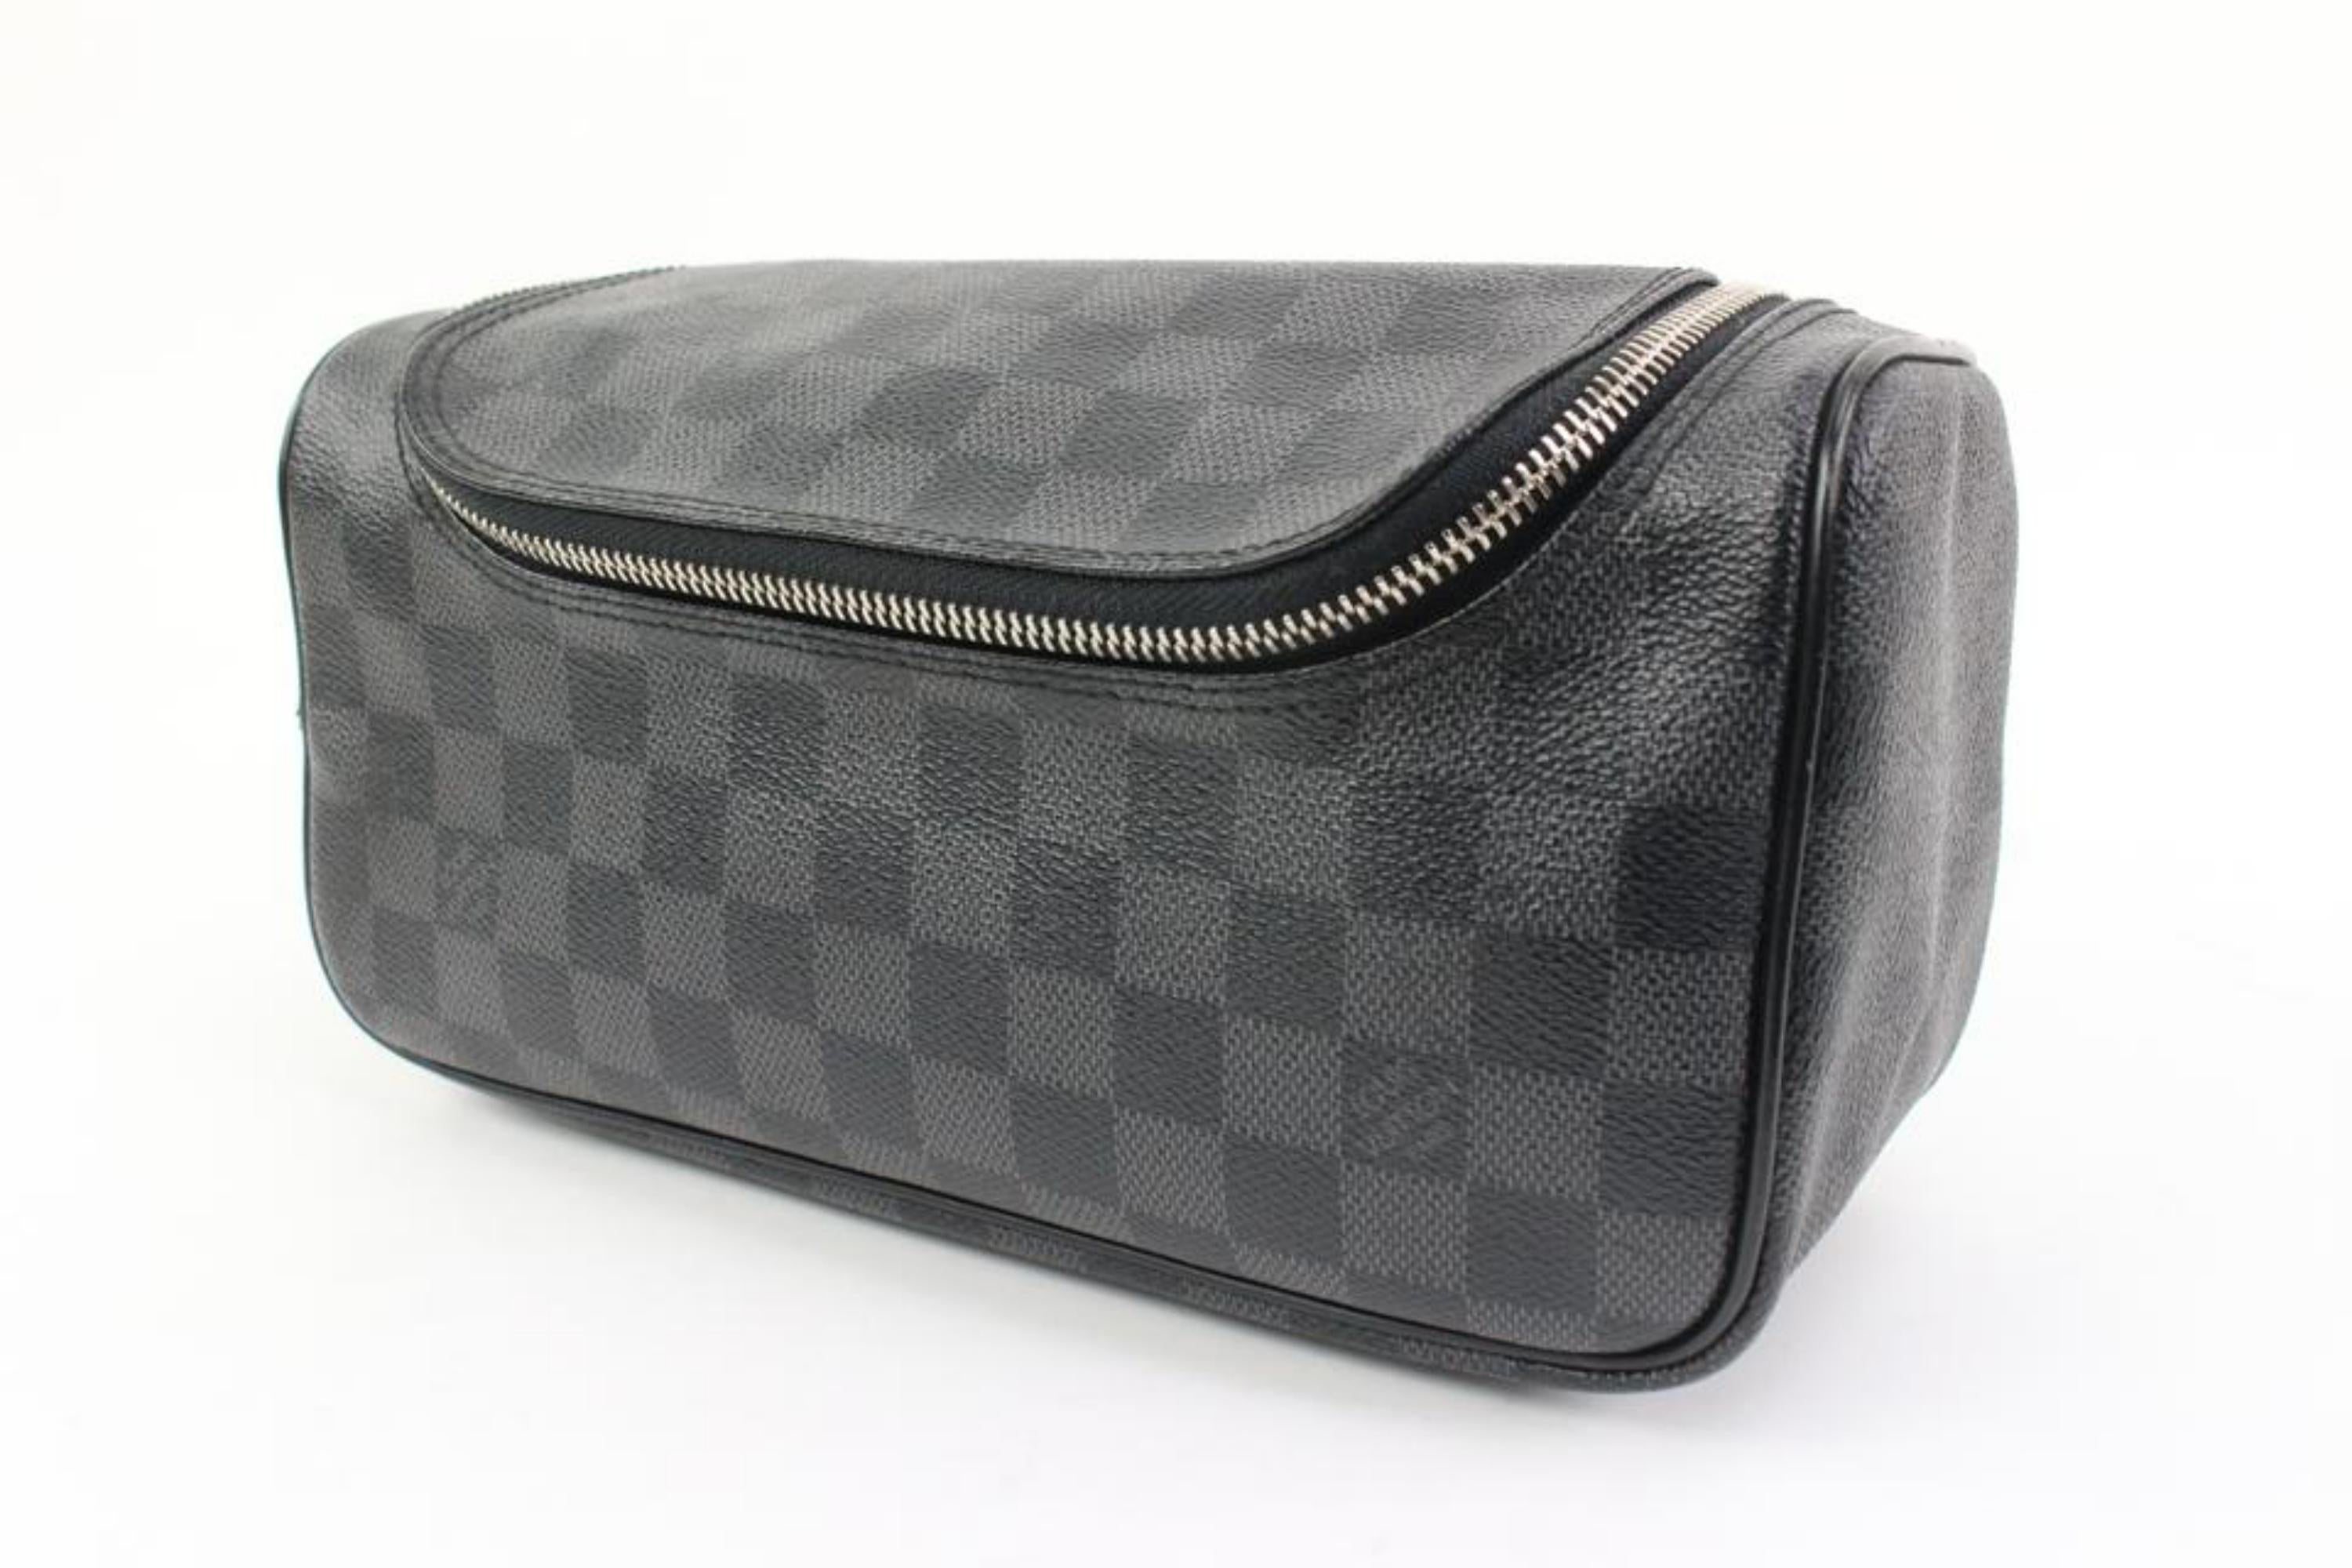 Louis Vuitton Damier Graphite Toiletry Pouch Cosmetic Case Travel Dopp 48lv314s
Date Code/Serial Number: BA2105
Made In: France
Measurements: Length:  9.75